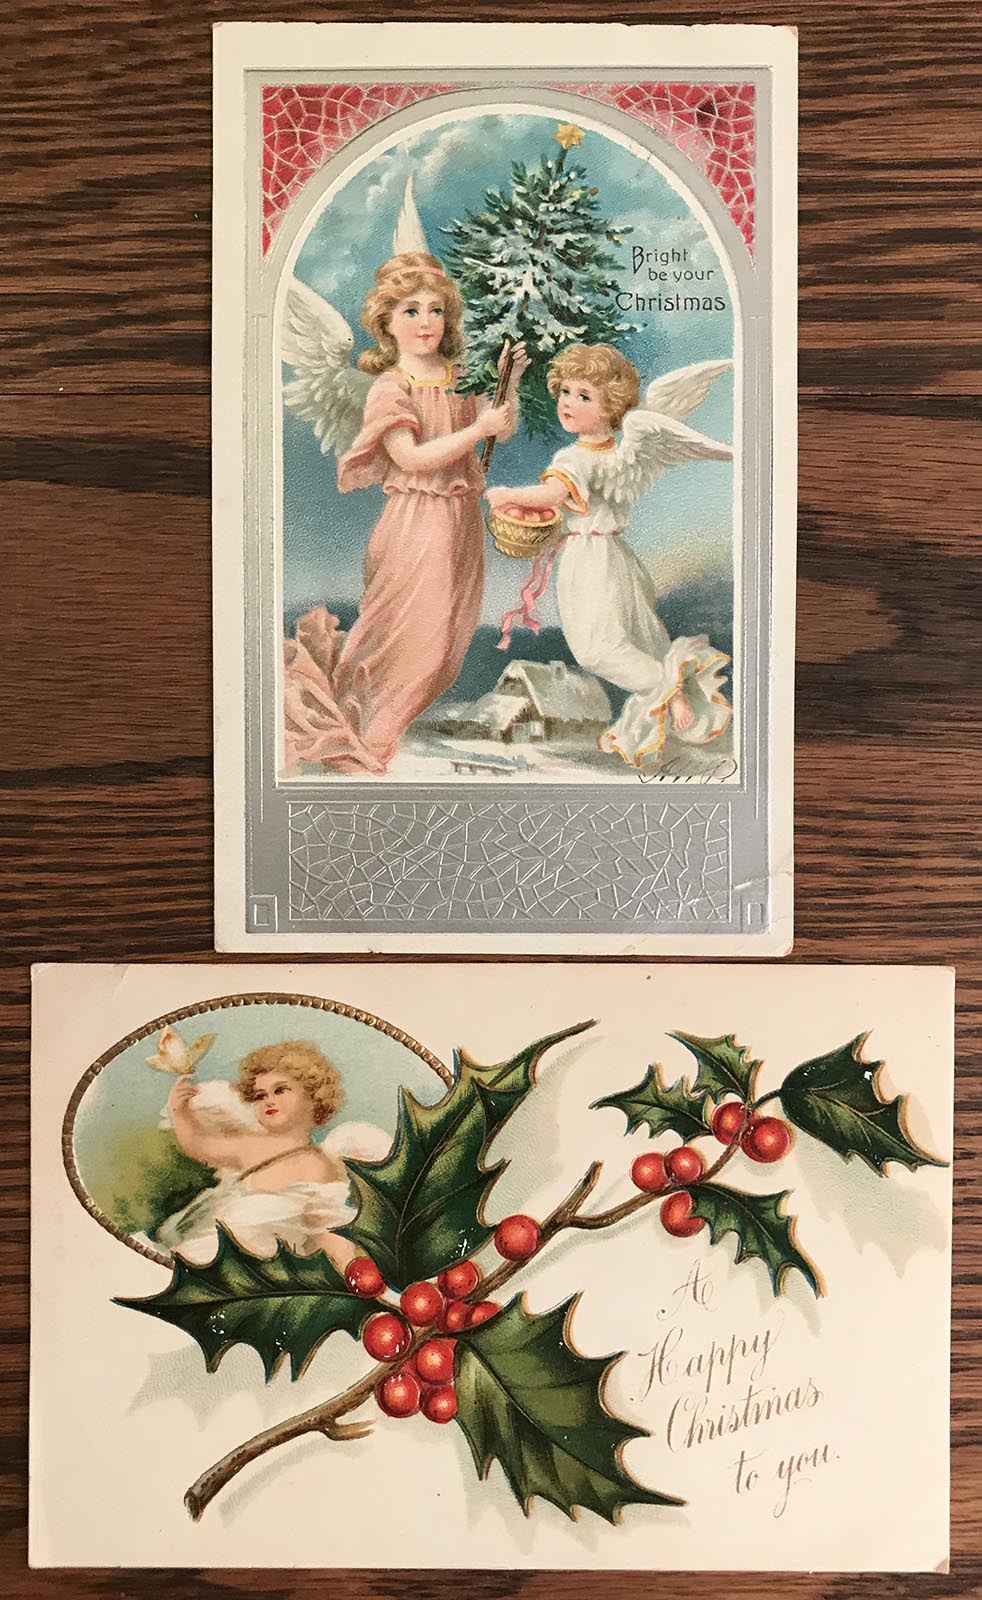 2 Embossed Antique Christmas Postcards with Angels or Cherubs, Both Postmarked 1907